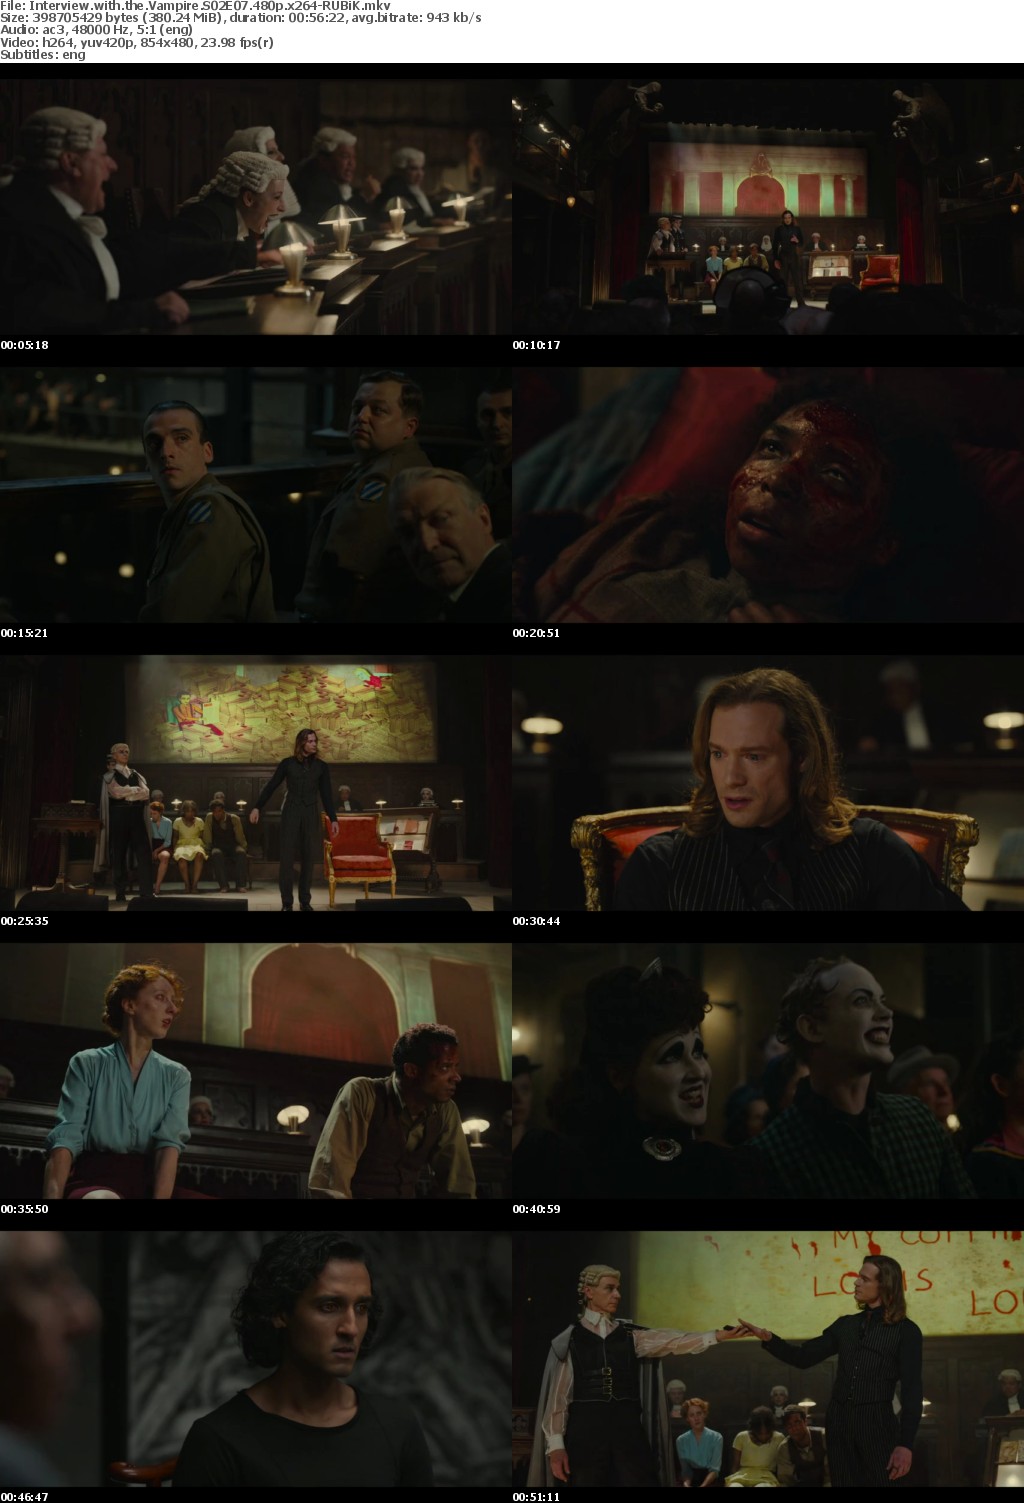 Interview with the Vampire S02E07 480p x264-RUBiK Saturn5